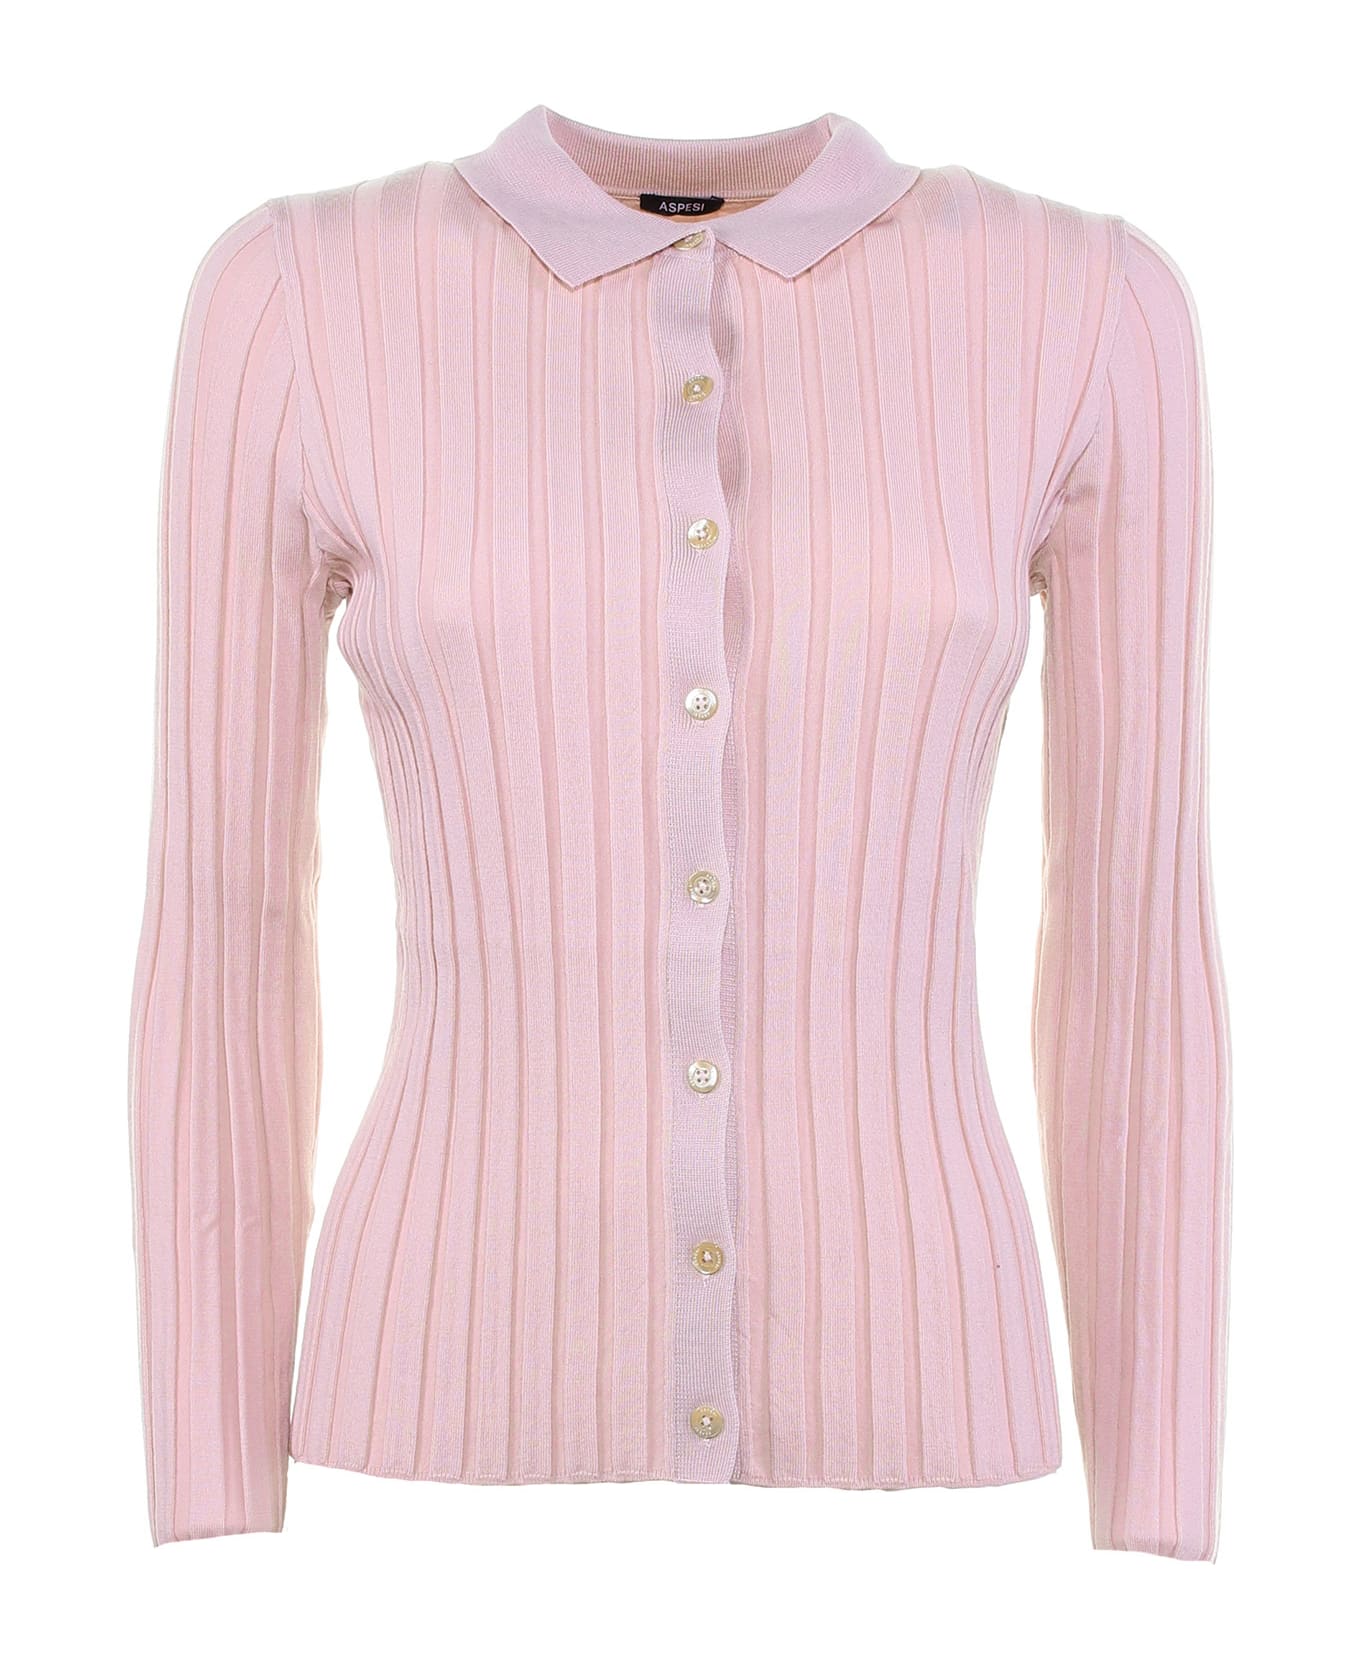 Aspesi Cardigan With Buttons - ROSA